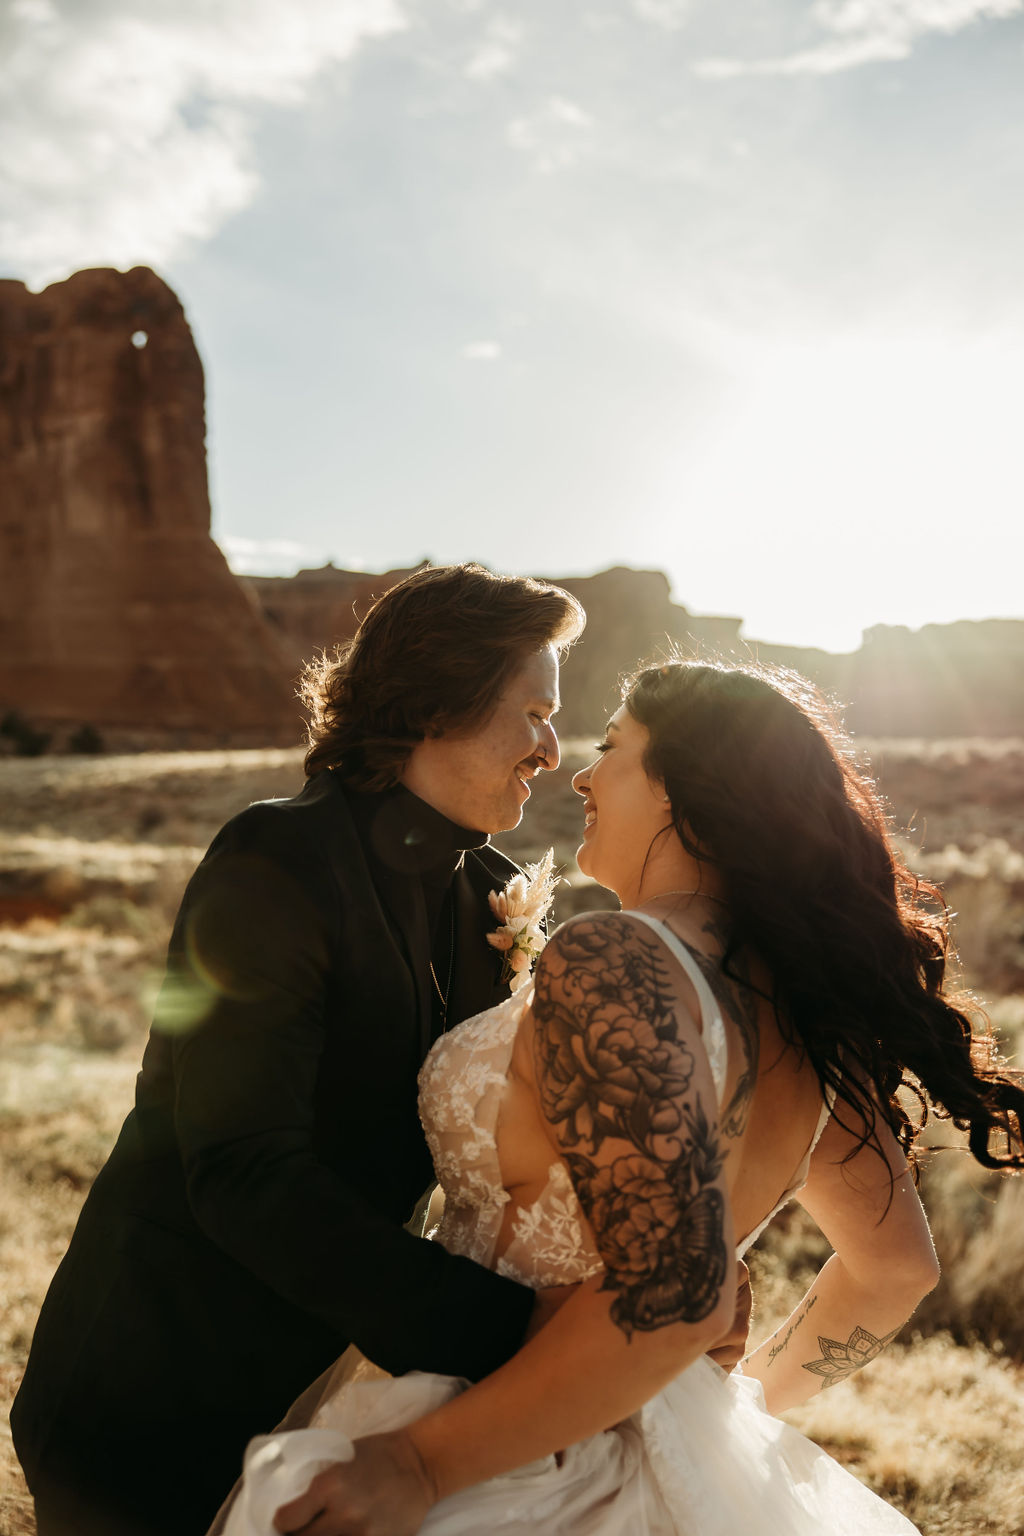 A couple in wedding attire embracing in front of the balanced rock formation in arches national park. | PHOTOGRAPHY BY BROGAN |  5 REASONS TO HAVE A MOAB NATIONAL PARK ELOPEMENT 